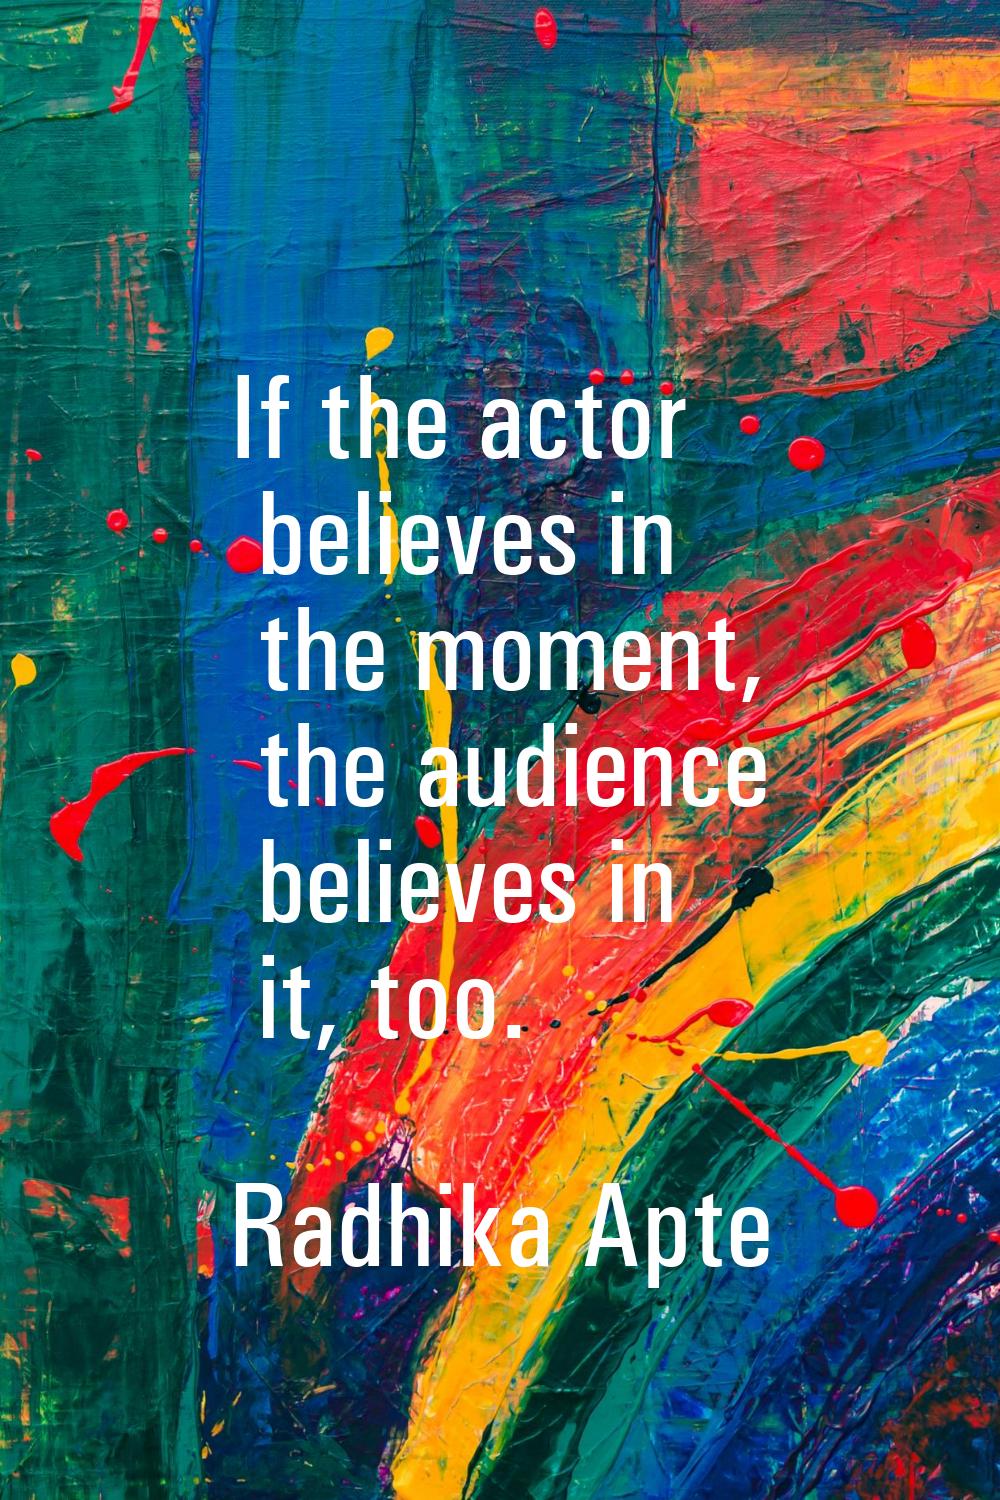 If the actor believes in the moment, the audience believes in it, too.